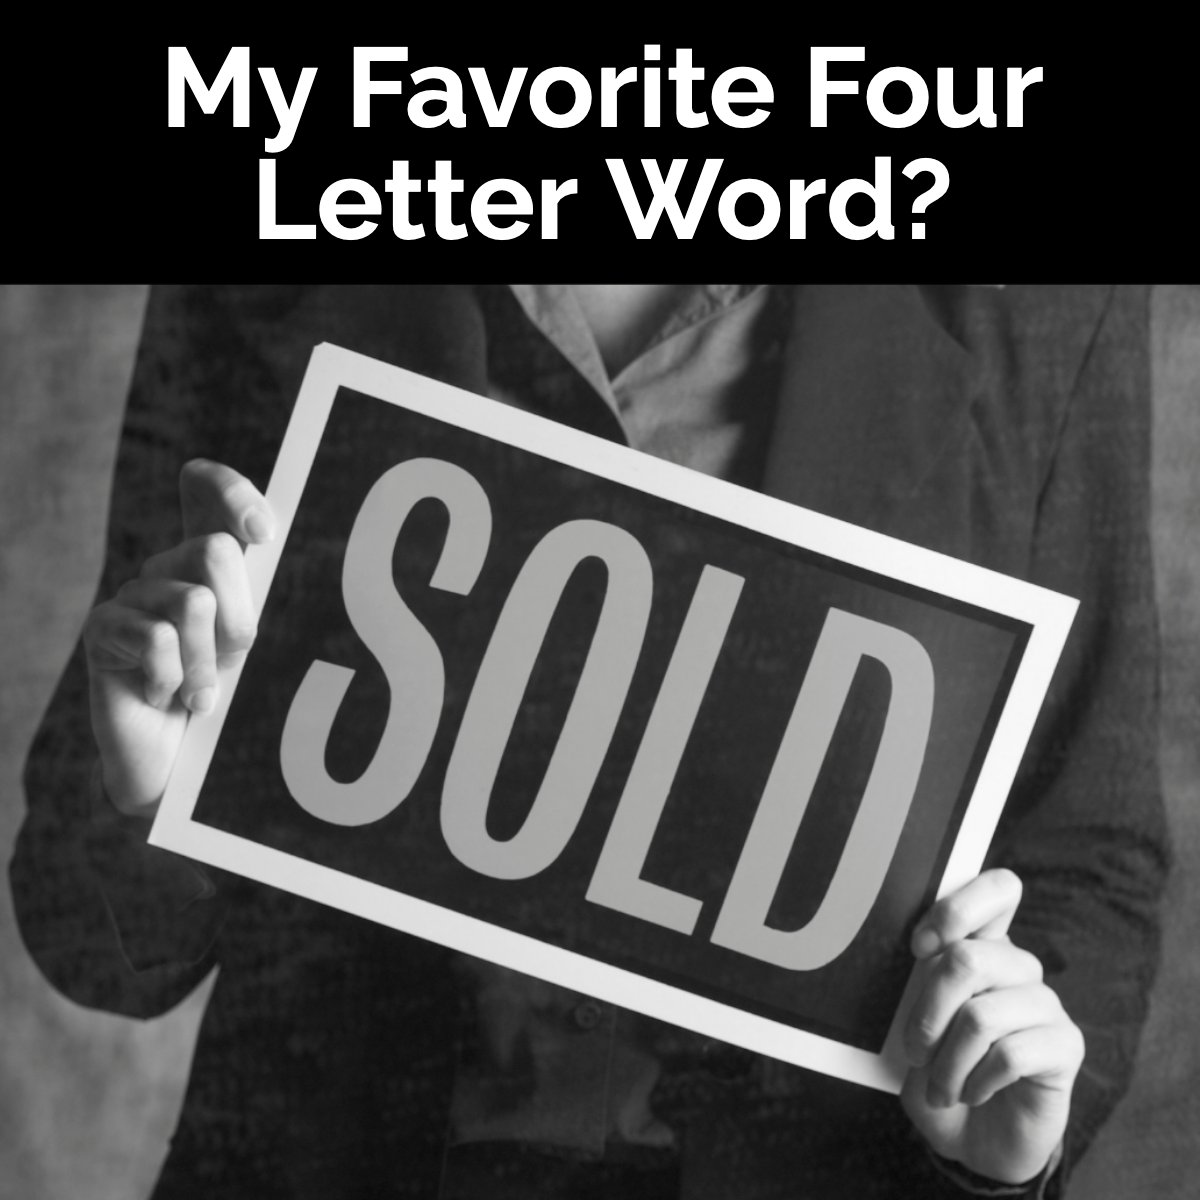 S-O-L-D

What's yours? 💰 💸 🤑

#sold #realestate101 #realestatehumor #favoriteword #fourletters 
 #AndreaDavis